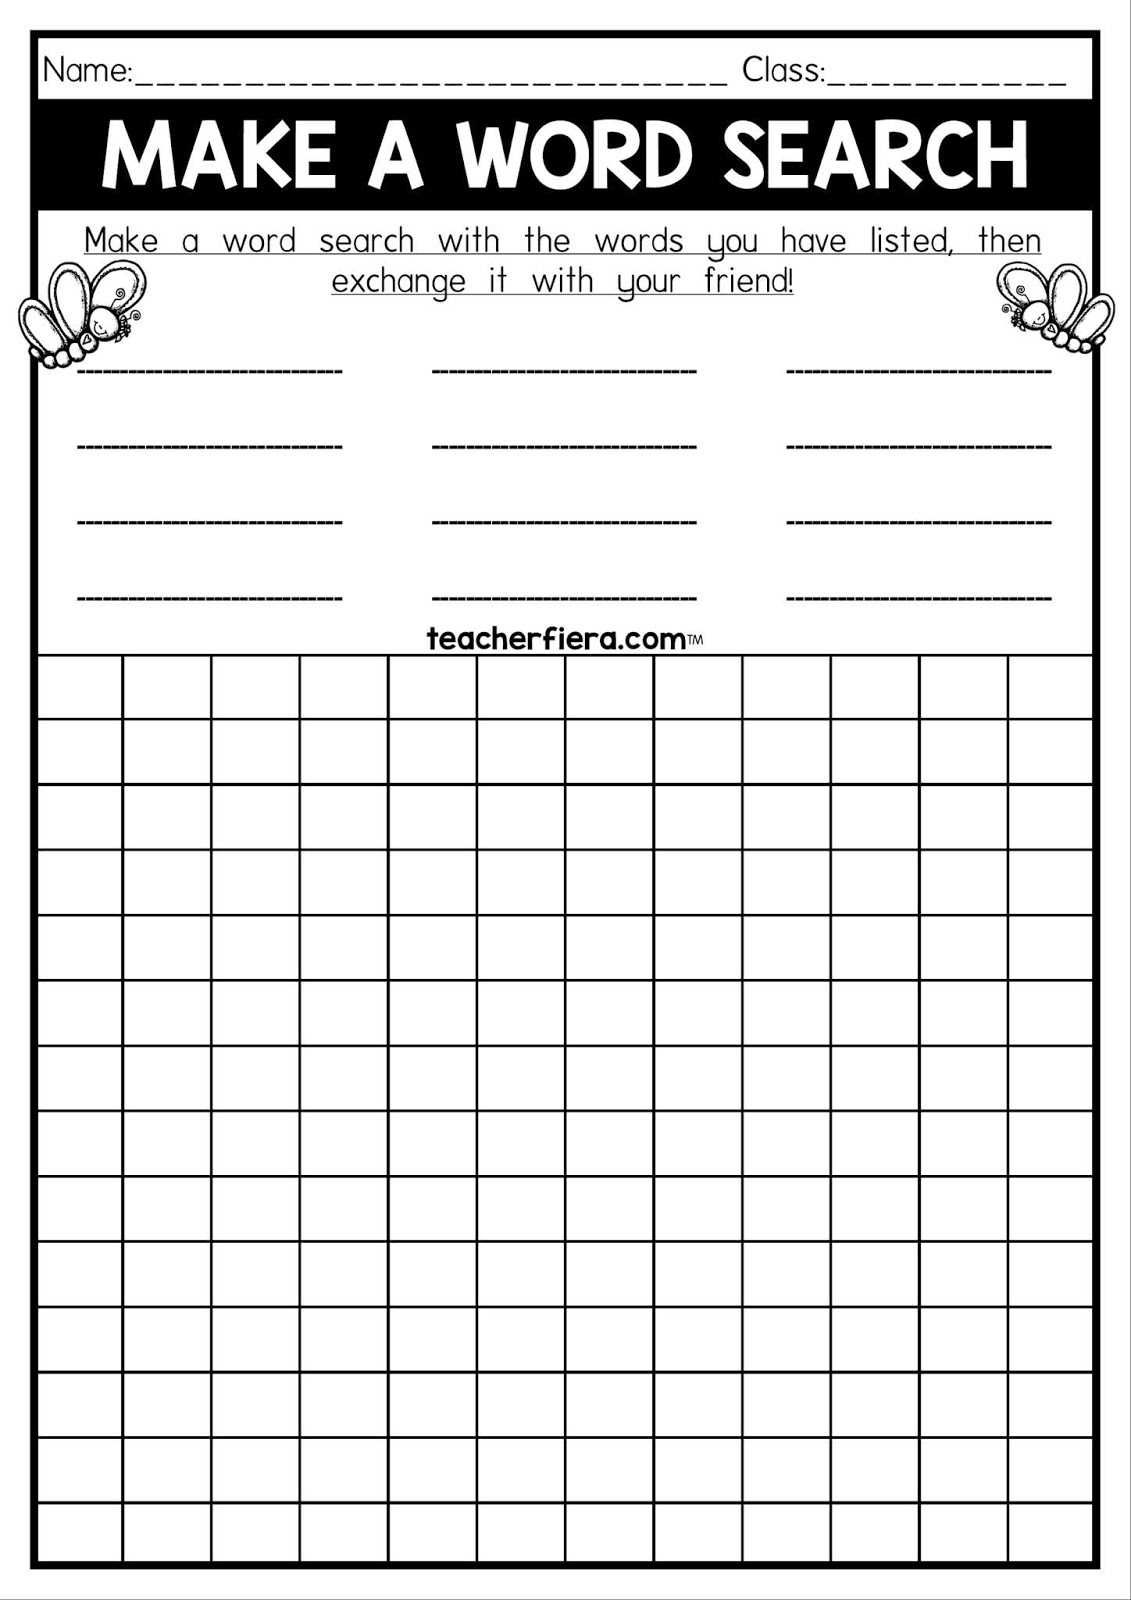 Teacherfiera: Make A Word Search For Word Sleuth Template